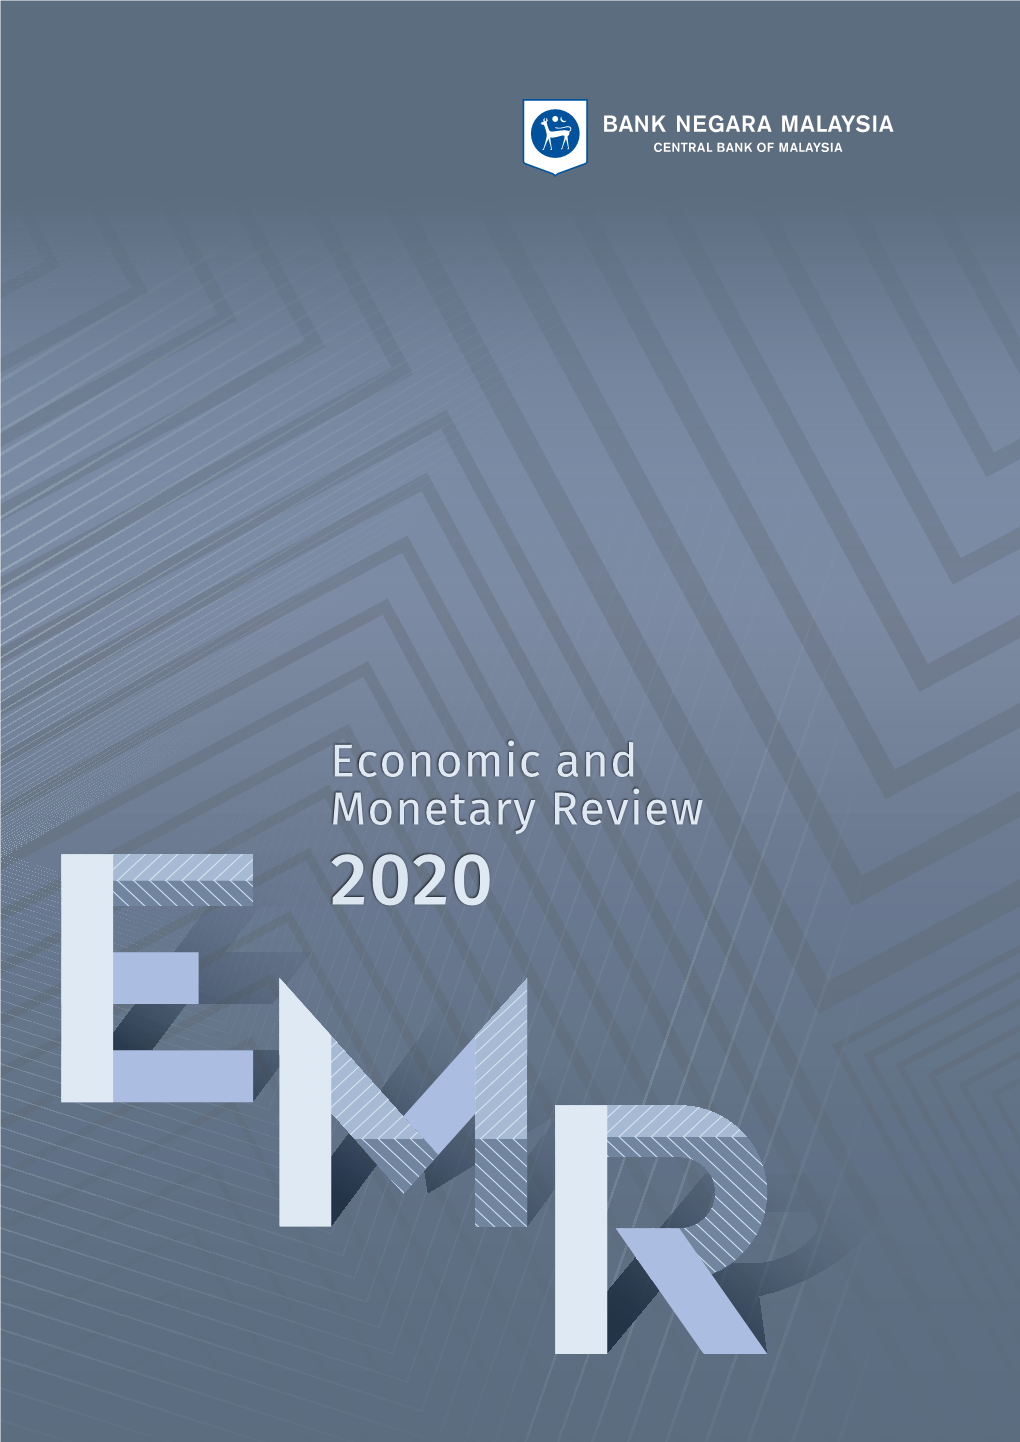 Economic and Monetary Review 2020 Contents